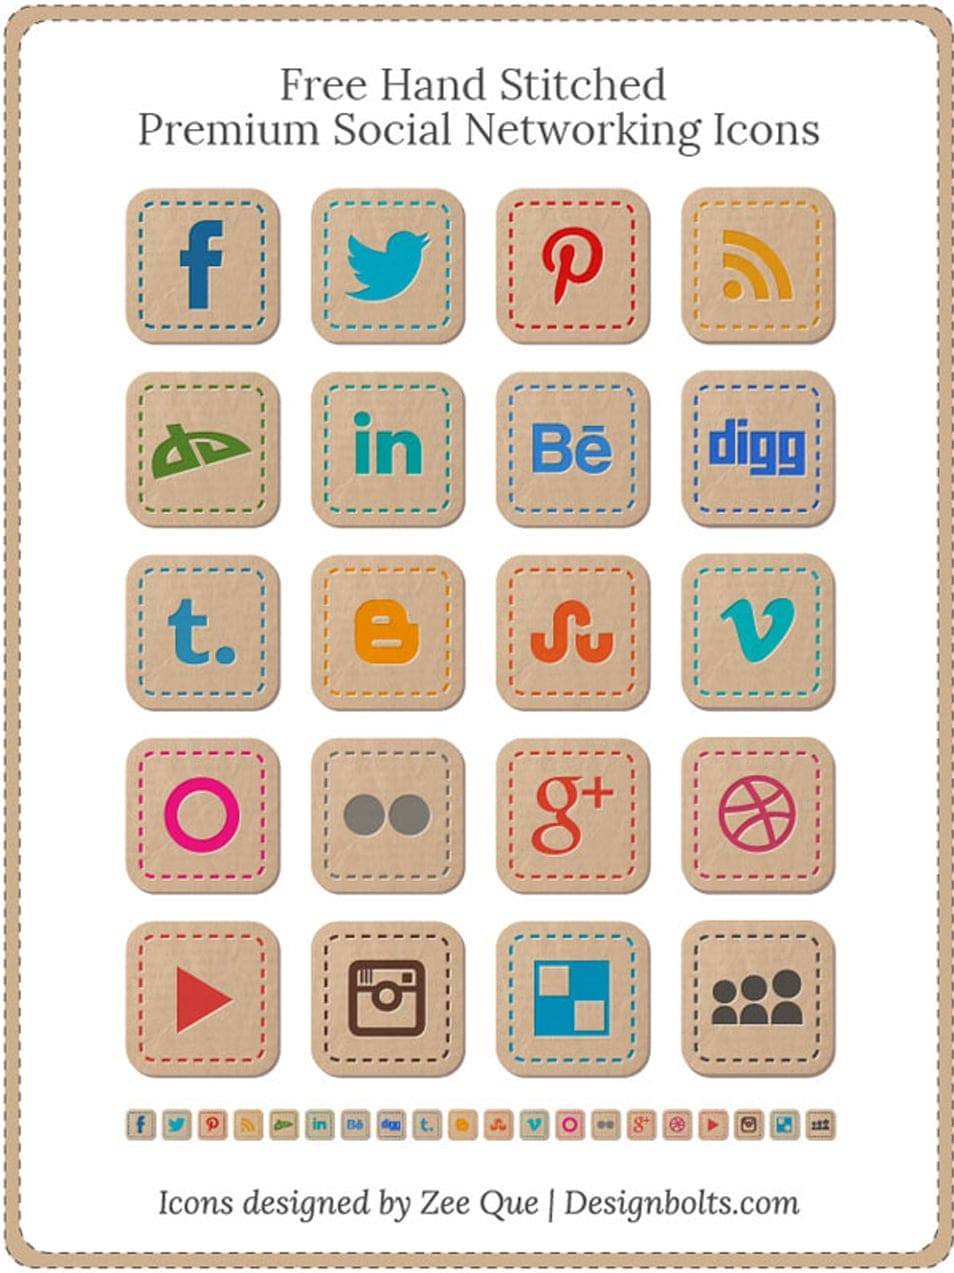 Free Hand Stitched Premium Social Networking Icons